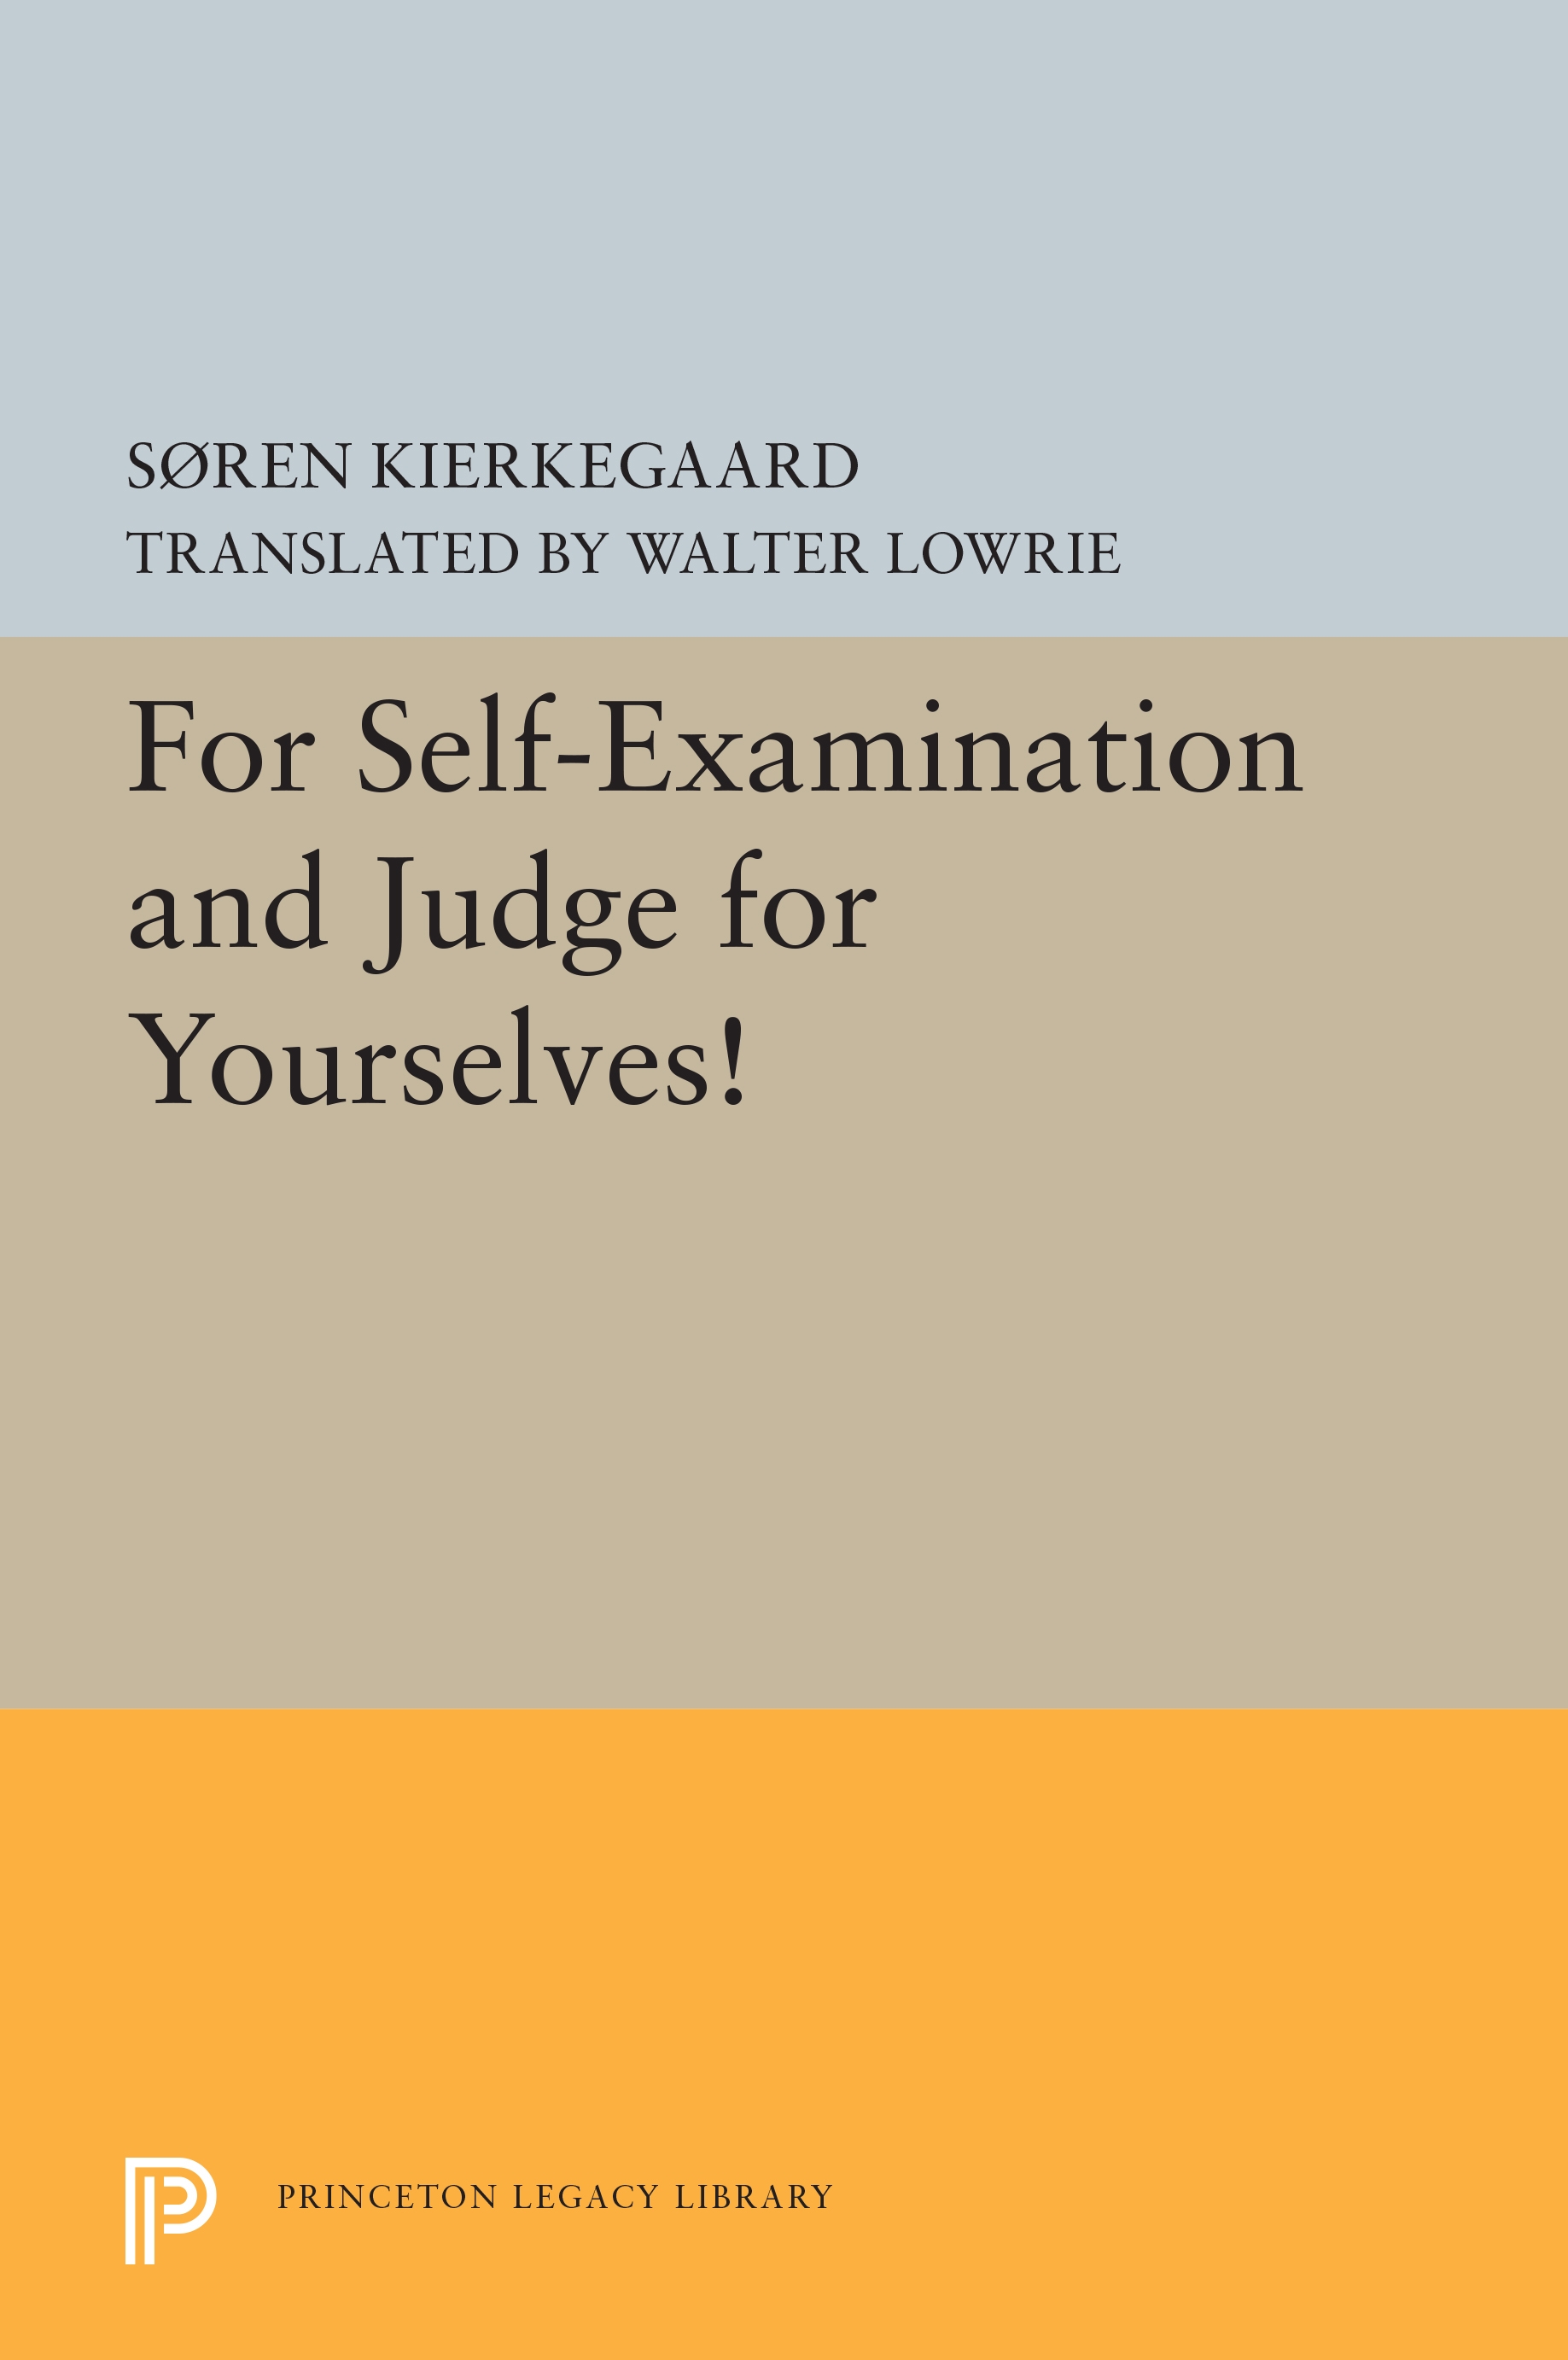 For Self-Examination and Judge for Yourselves! | Princeton University Press